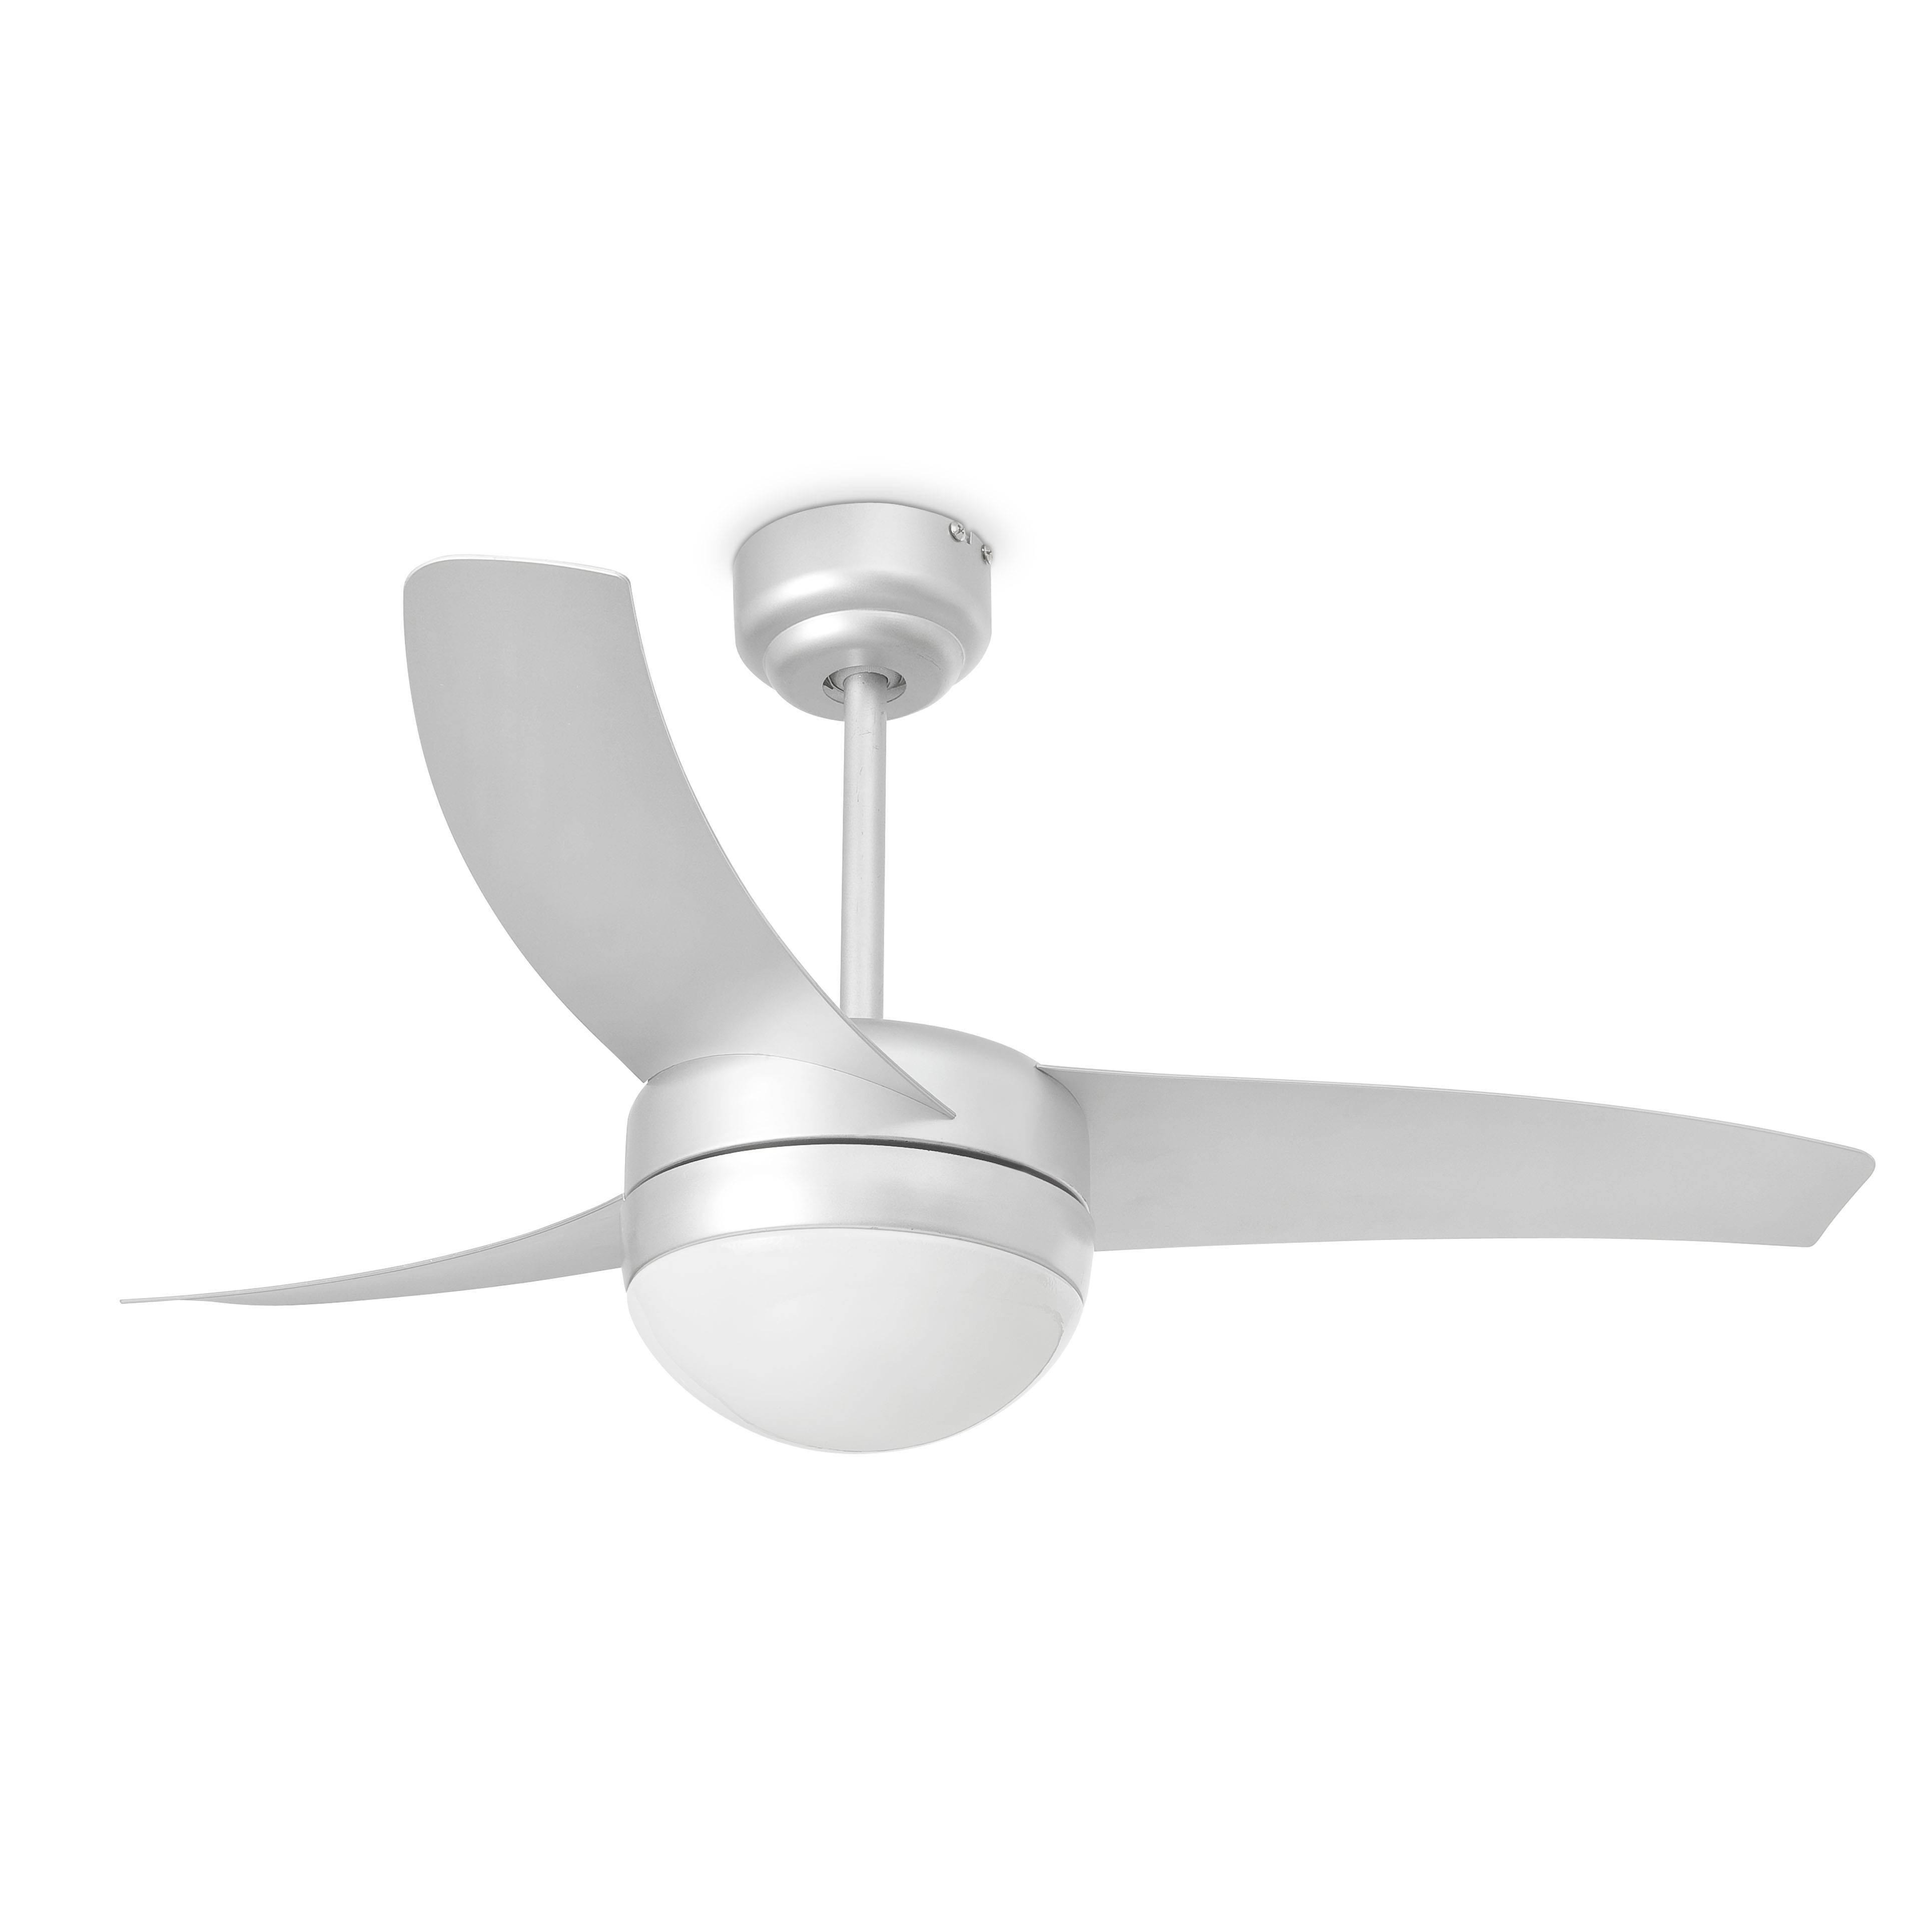 Easy 2 Light Small Ceiling Fan Grey with Light E27 - image 1